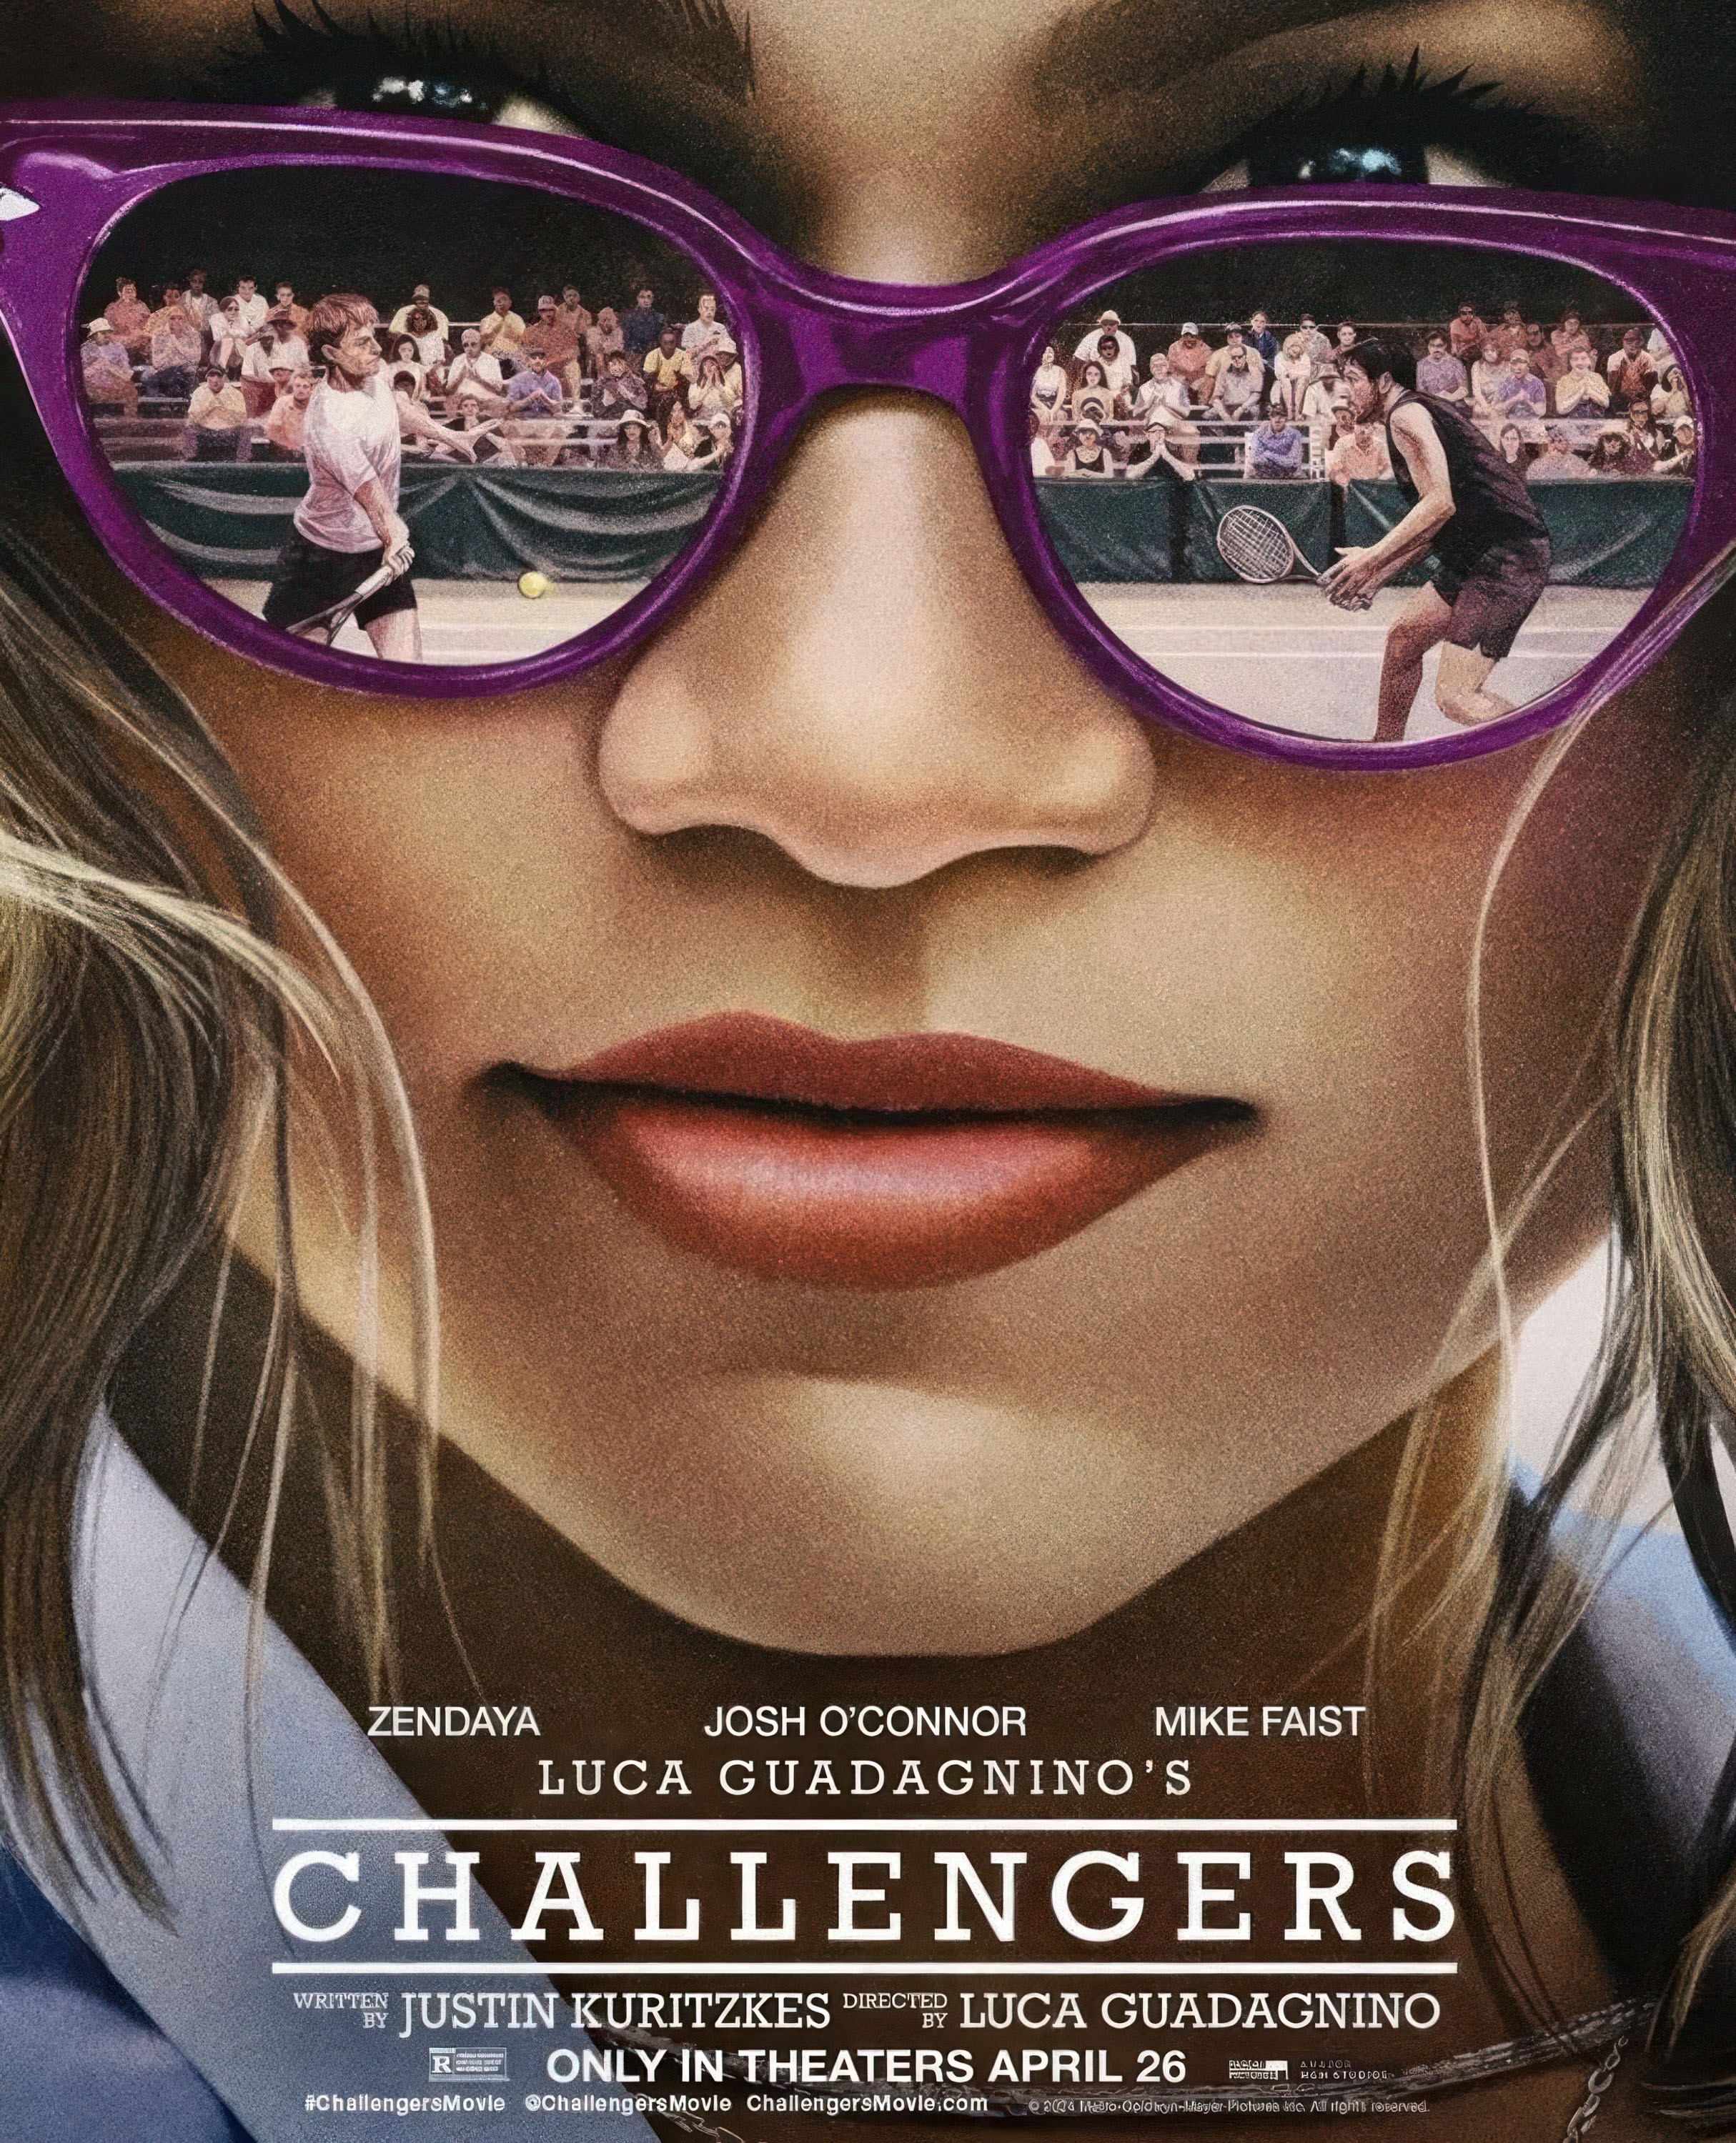 Movie poster for &quot;Challengers&quot; featuring Zendaya in sunglasses with reflection of tennis audience. In theaters April 26